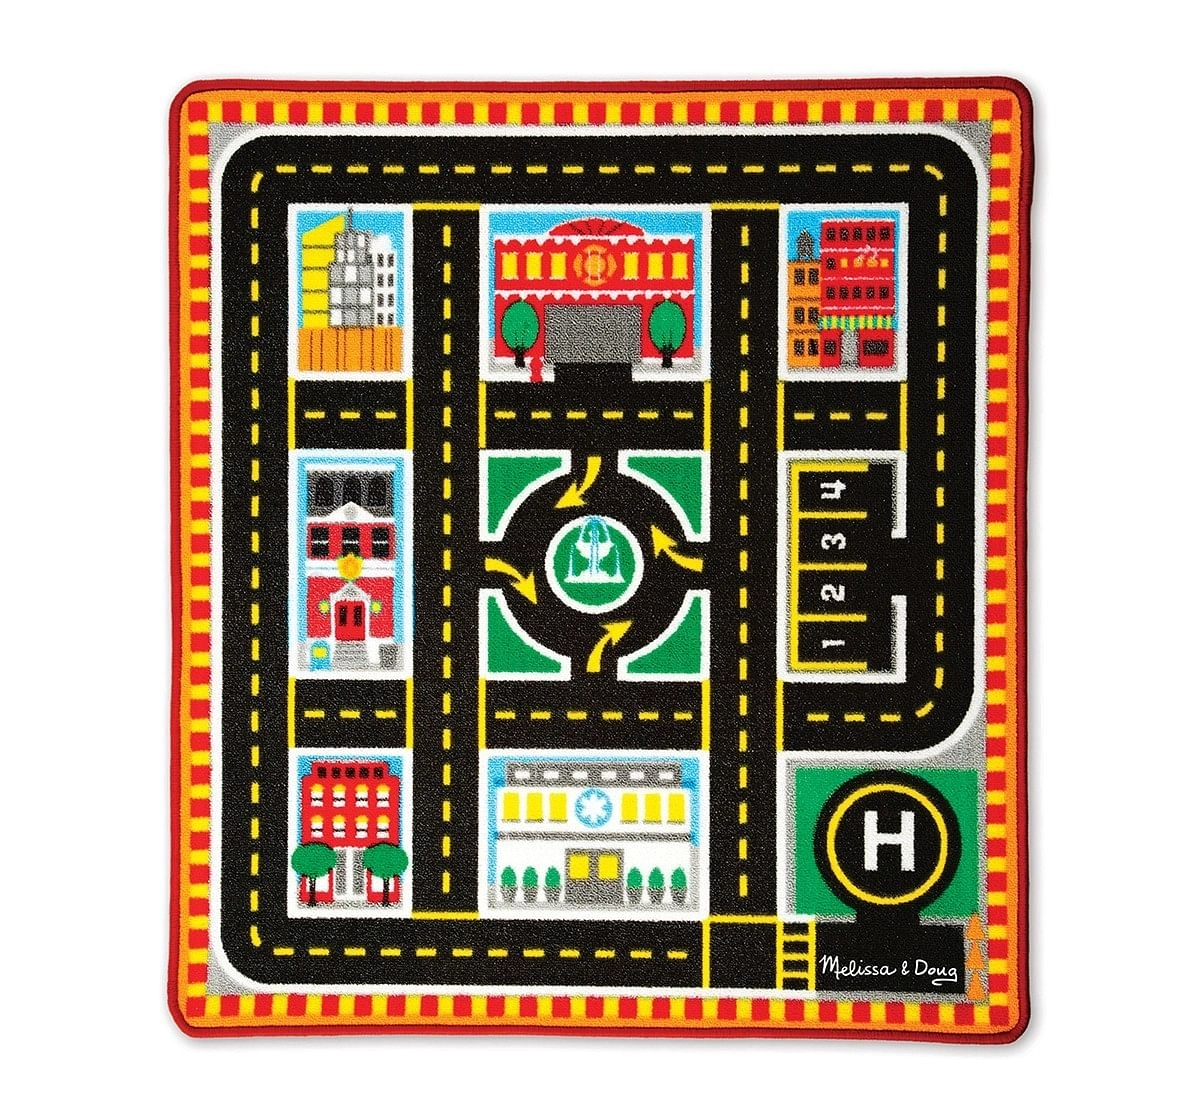 Melissa & Doug : Round the city rescue rug Baby Gear for Kids age 3Y+ 